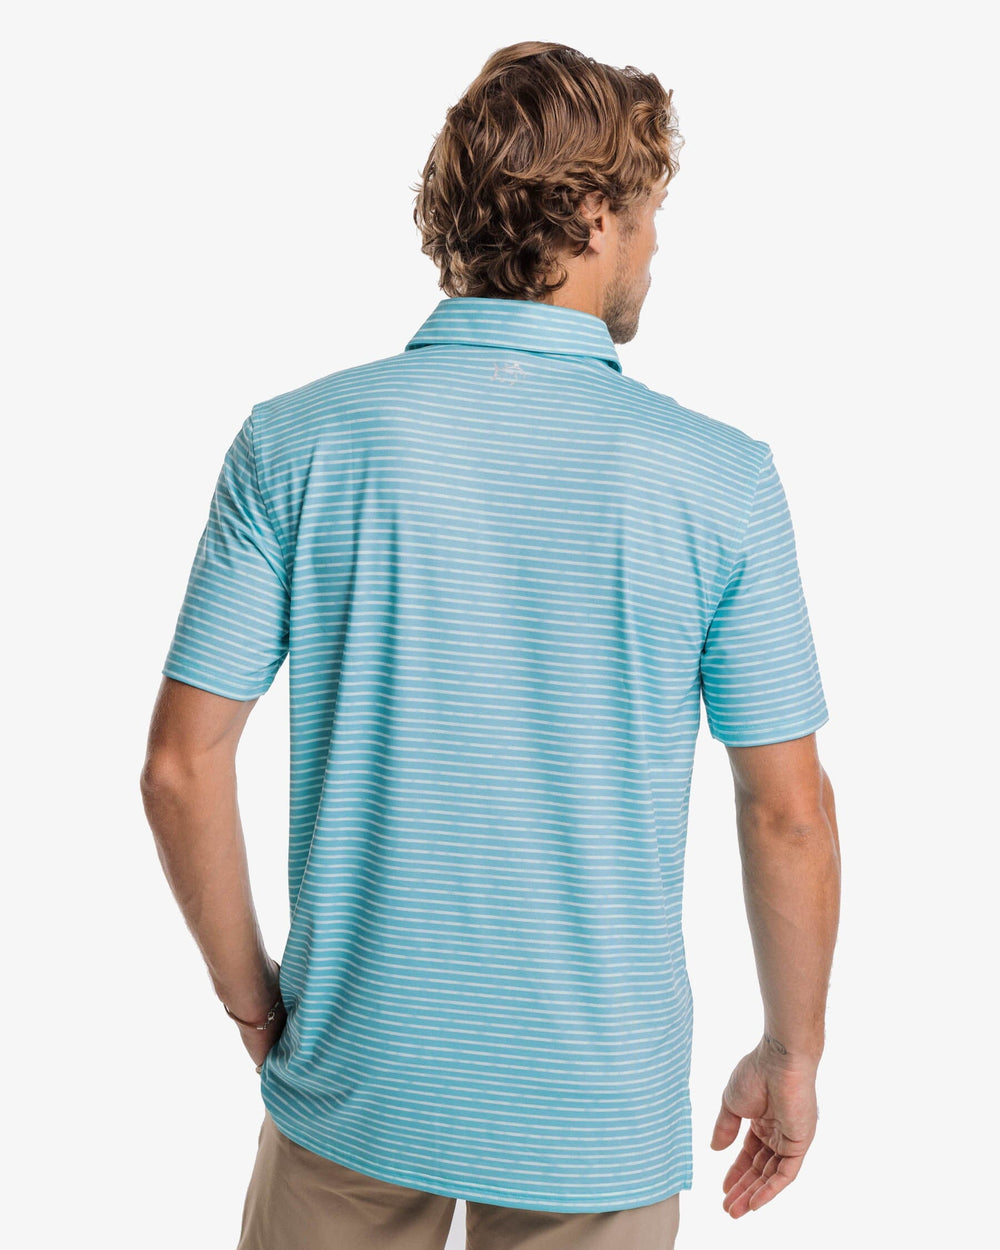 The back view of the Southern Tide Driver Wymberly Stripe Performance Polo Shirt by Southern Tide - Tidal Wave